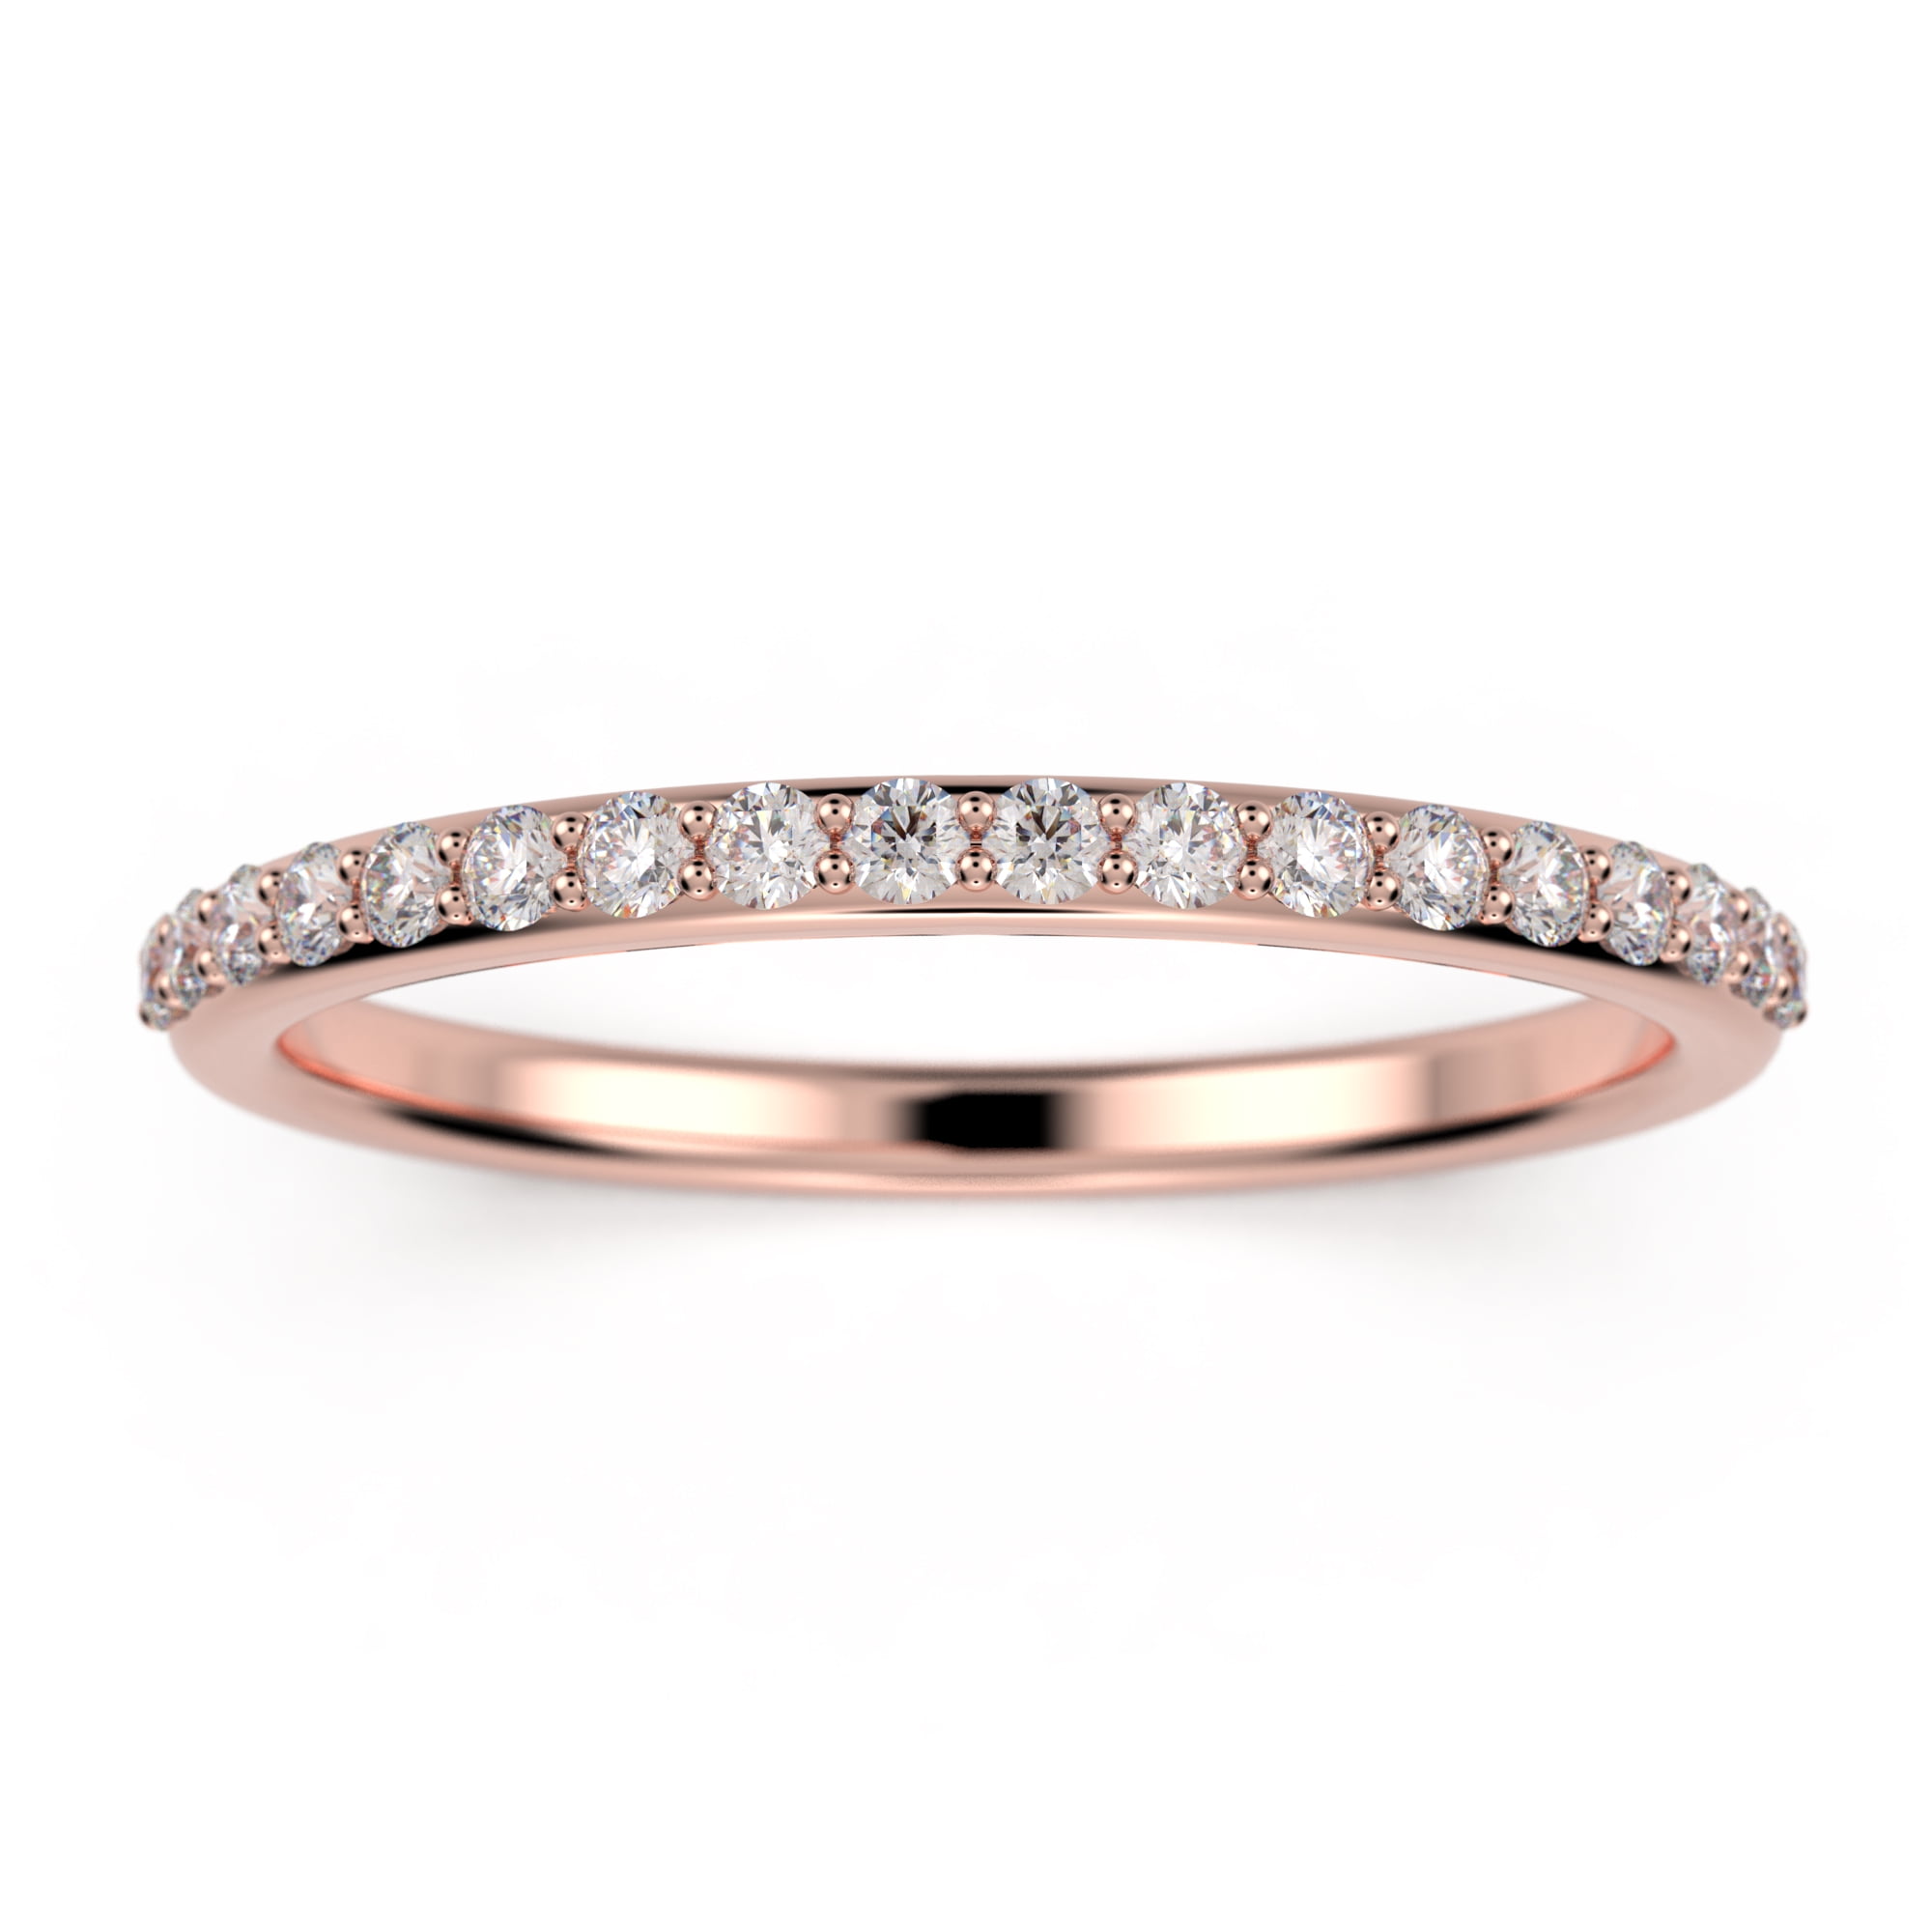 Details about   1.75 Ct Round Cut Diamond 14k White Gold Over Half Eternity Wedding Band Ring. 